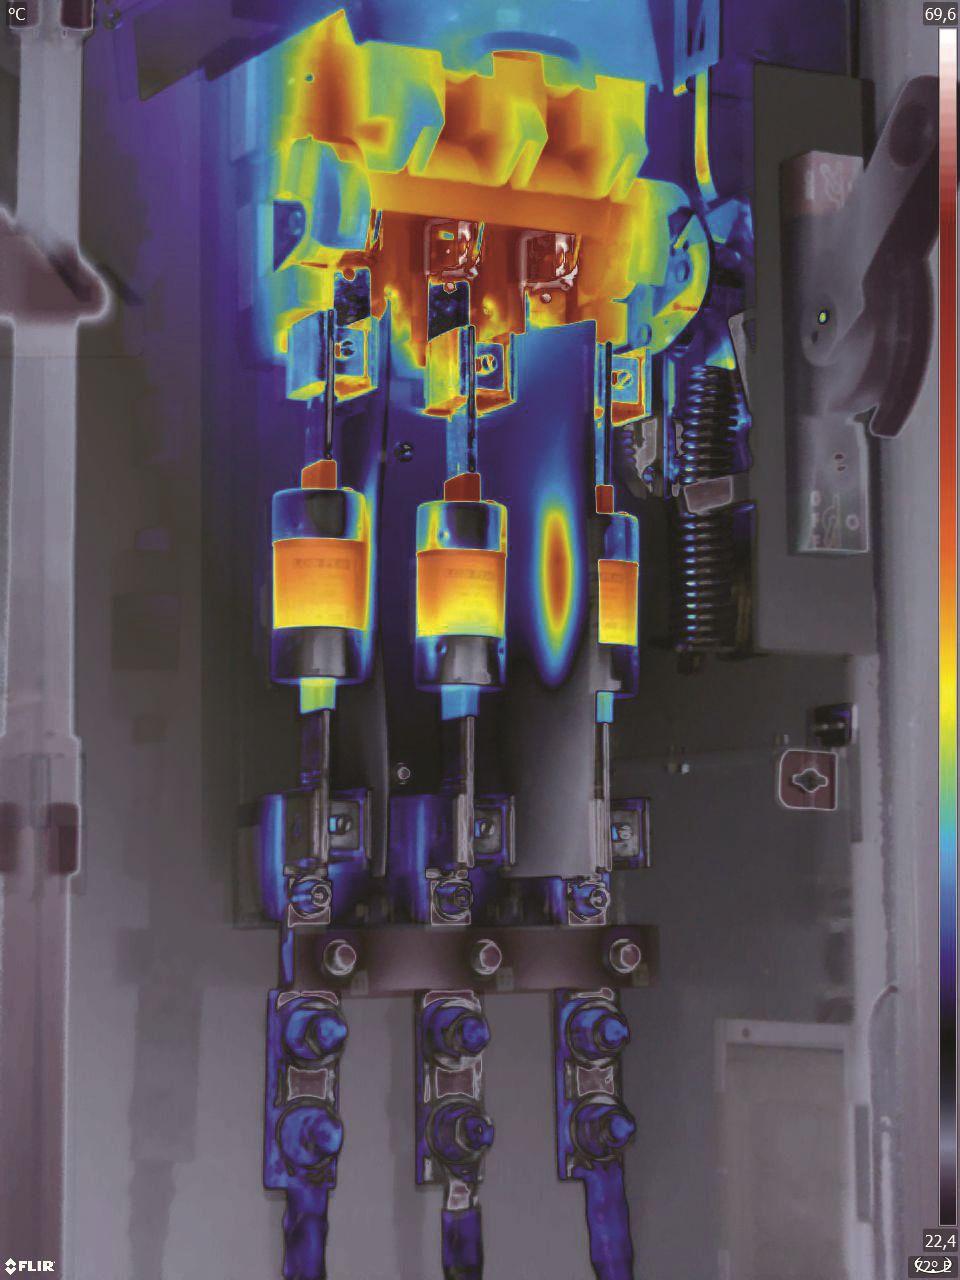 Teledyne Thermal Technology helps Electrical Inspections for Oil and Gas Industry